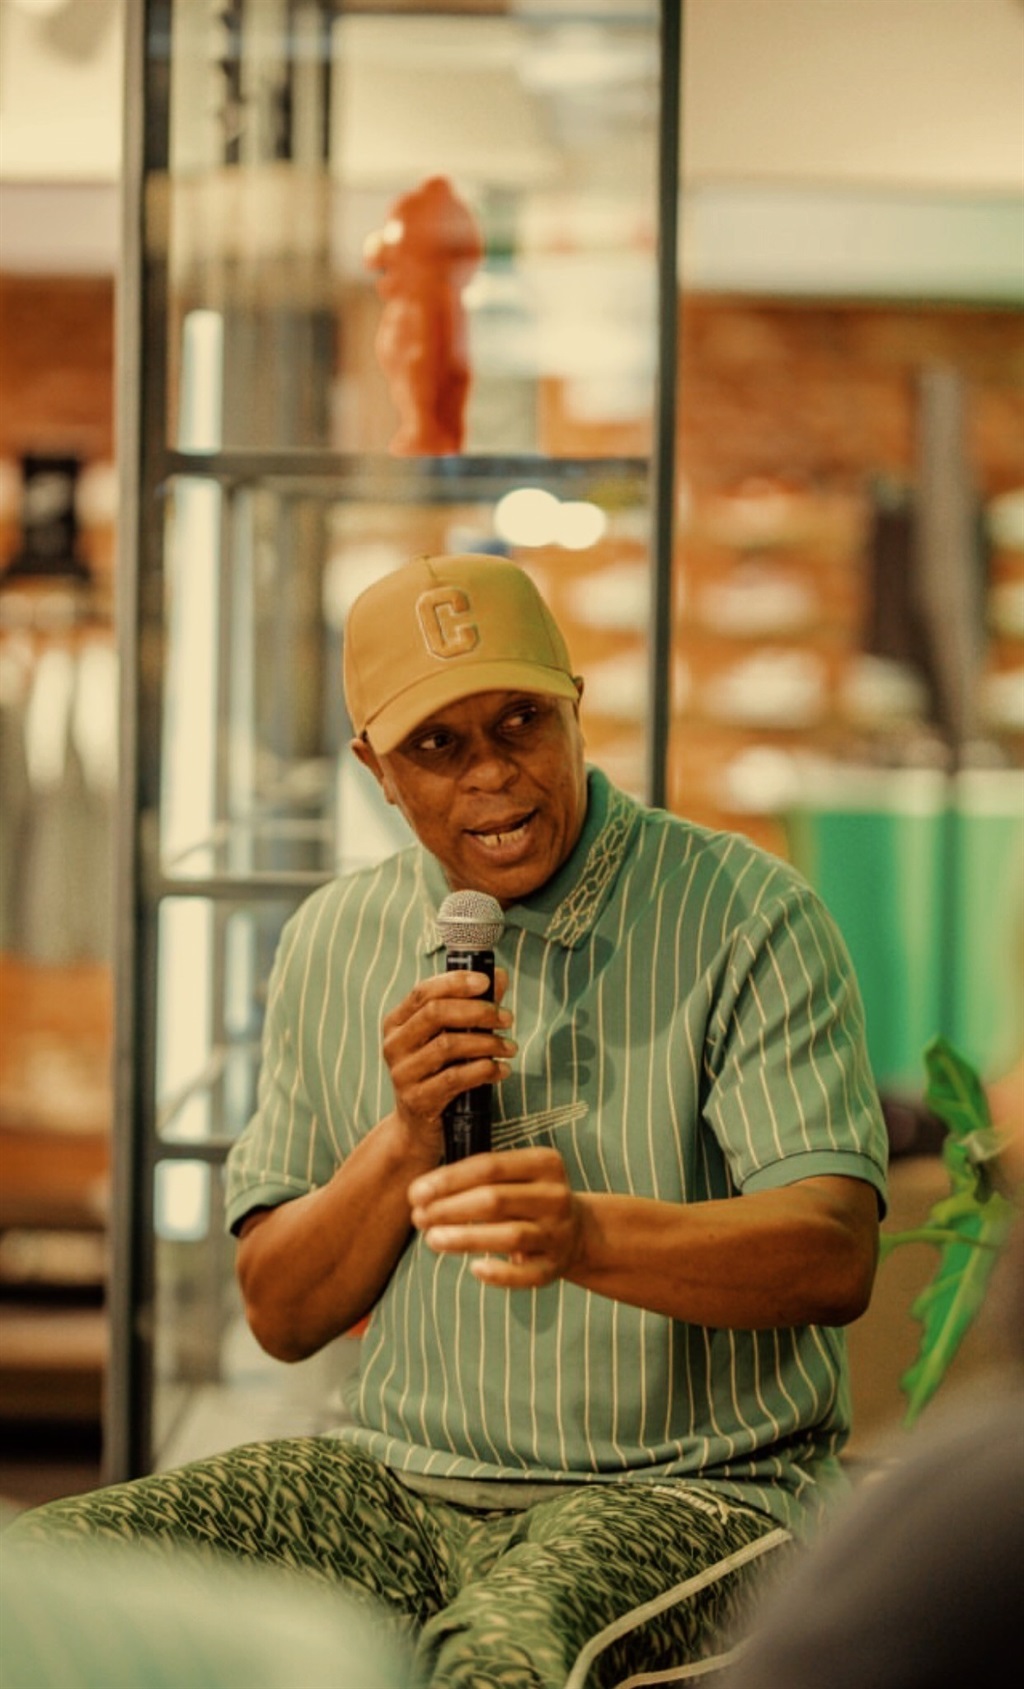 Doctor Khumalo at the PUMA Players' Lounge Collect